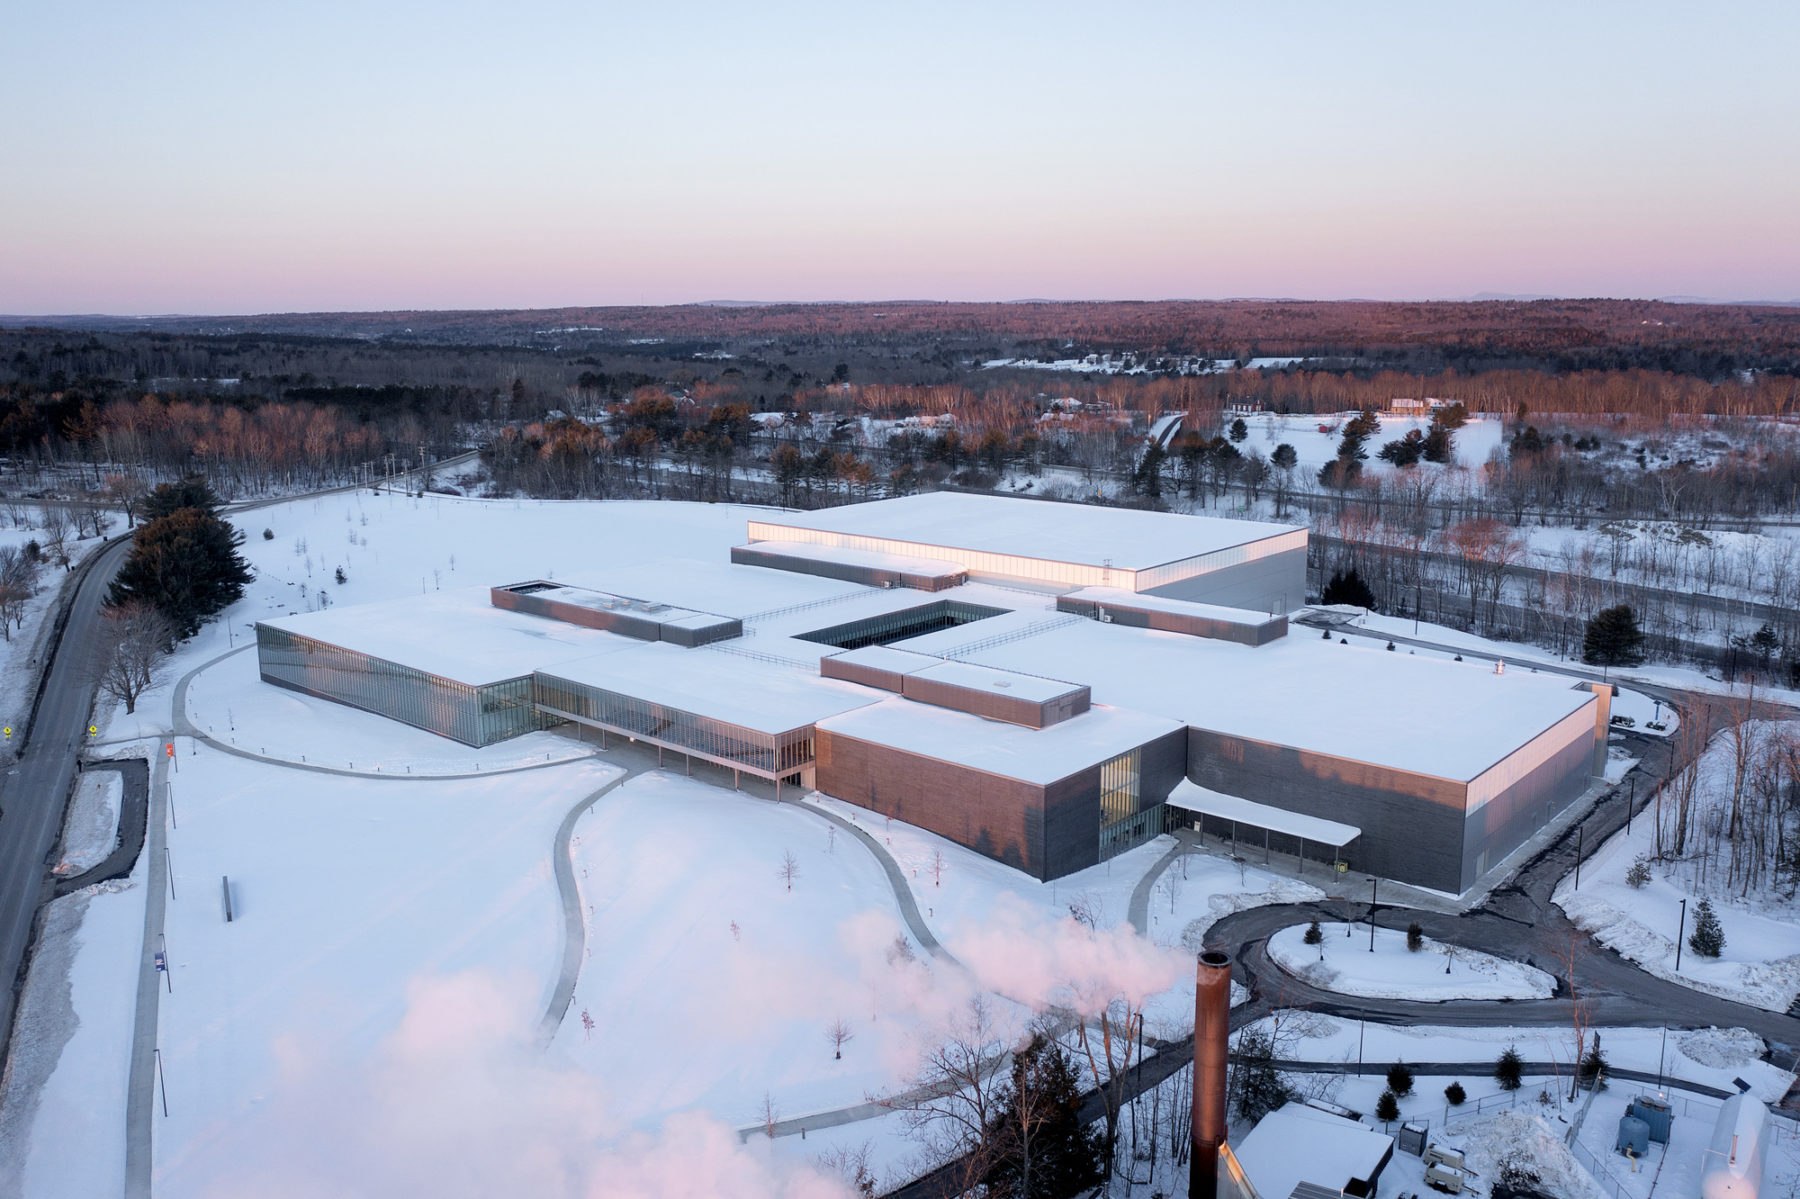 exterior aerial photo of building at dusk - landscape is snow covered